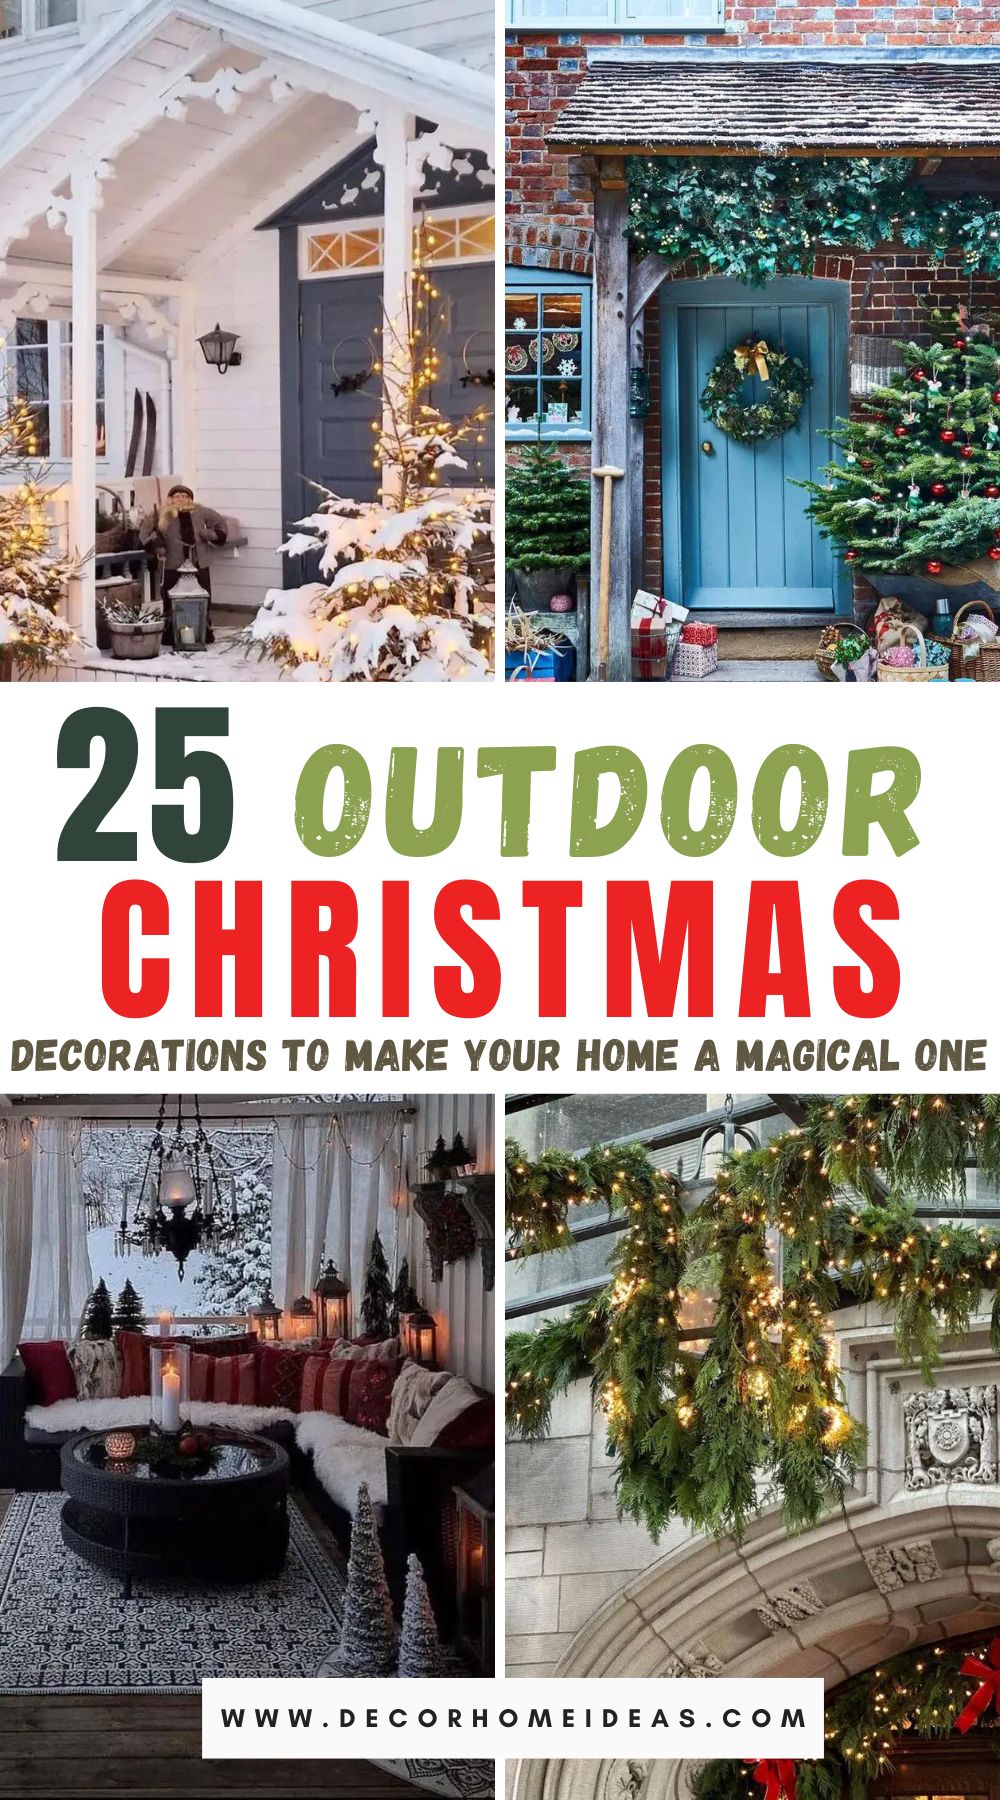 Discover 25 enchanting Christmas lights ideas to adorn your house exterior and create a mesmerizing holiday display. From twinkling icicle lights to vibrant LED projections, find inspiration to transform your home into a festive winter wonderland that will captivate all who pass by.